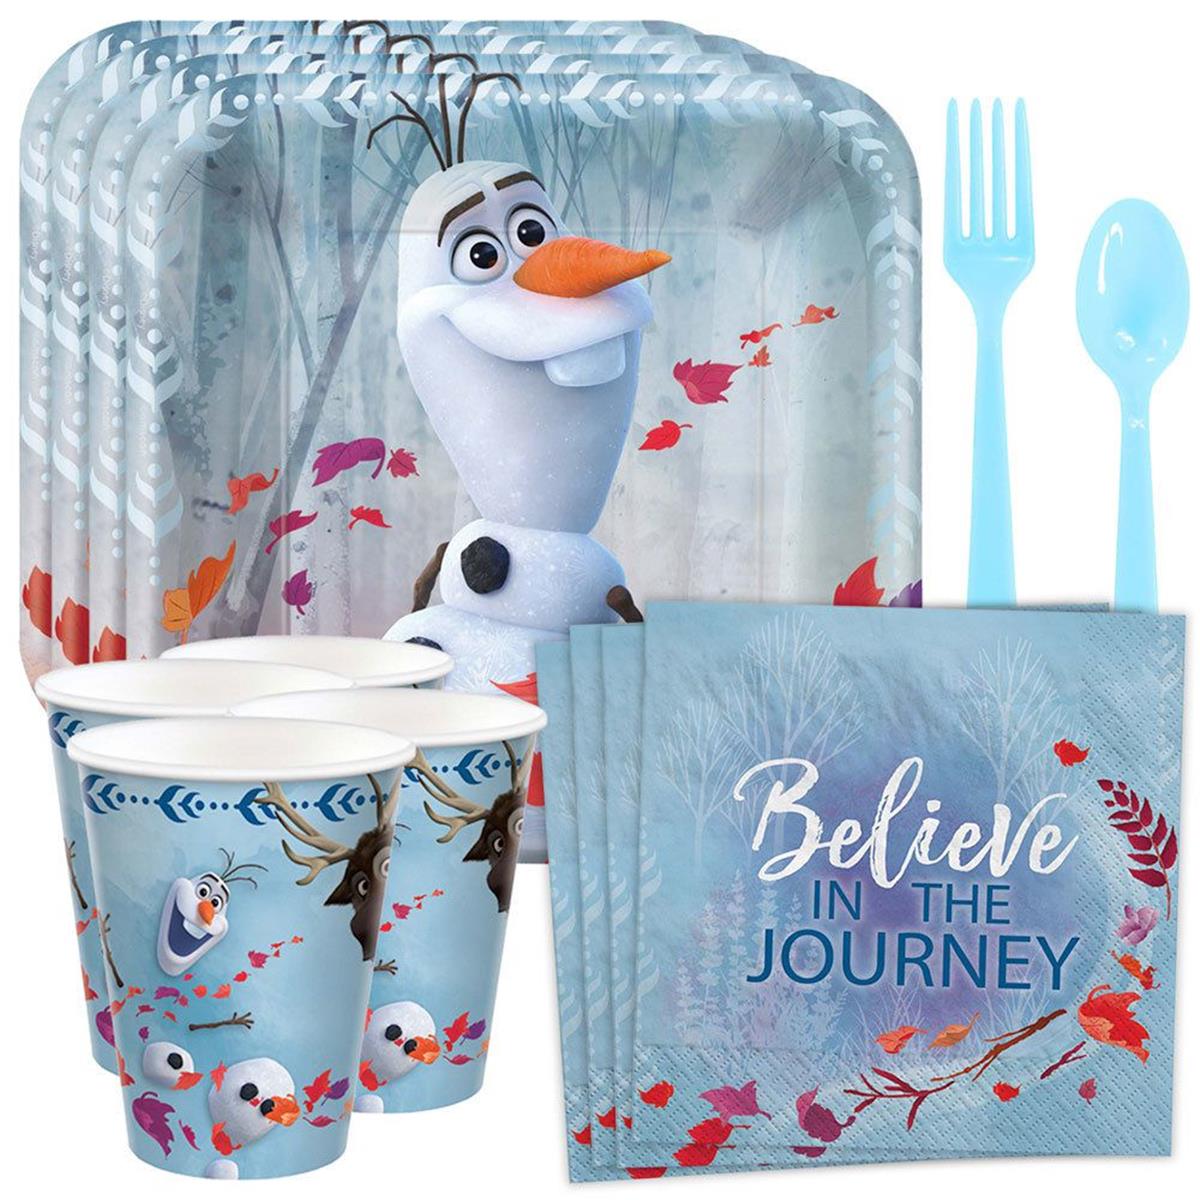 Picture of Birth9999 625377 Frozen 2 Tableware Kit - Serves 8